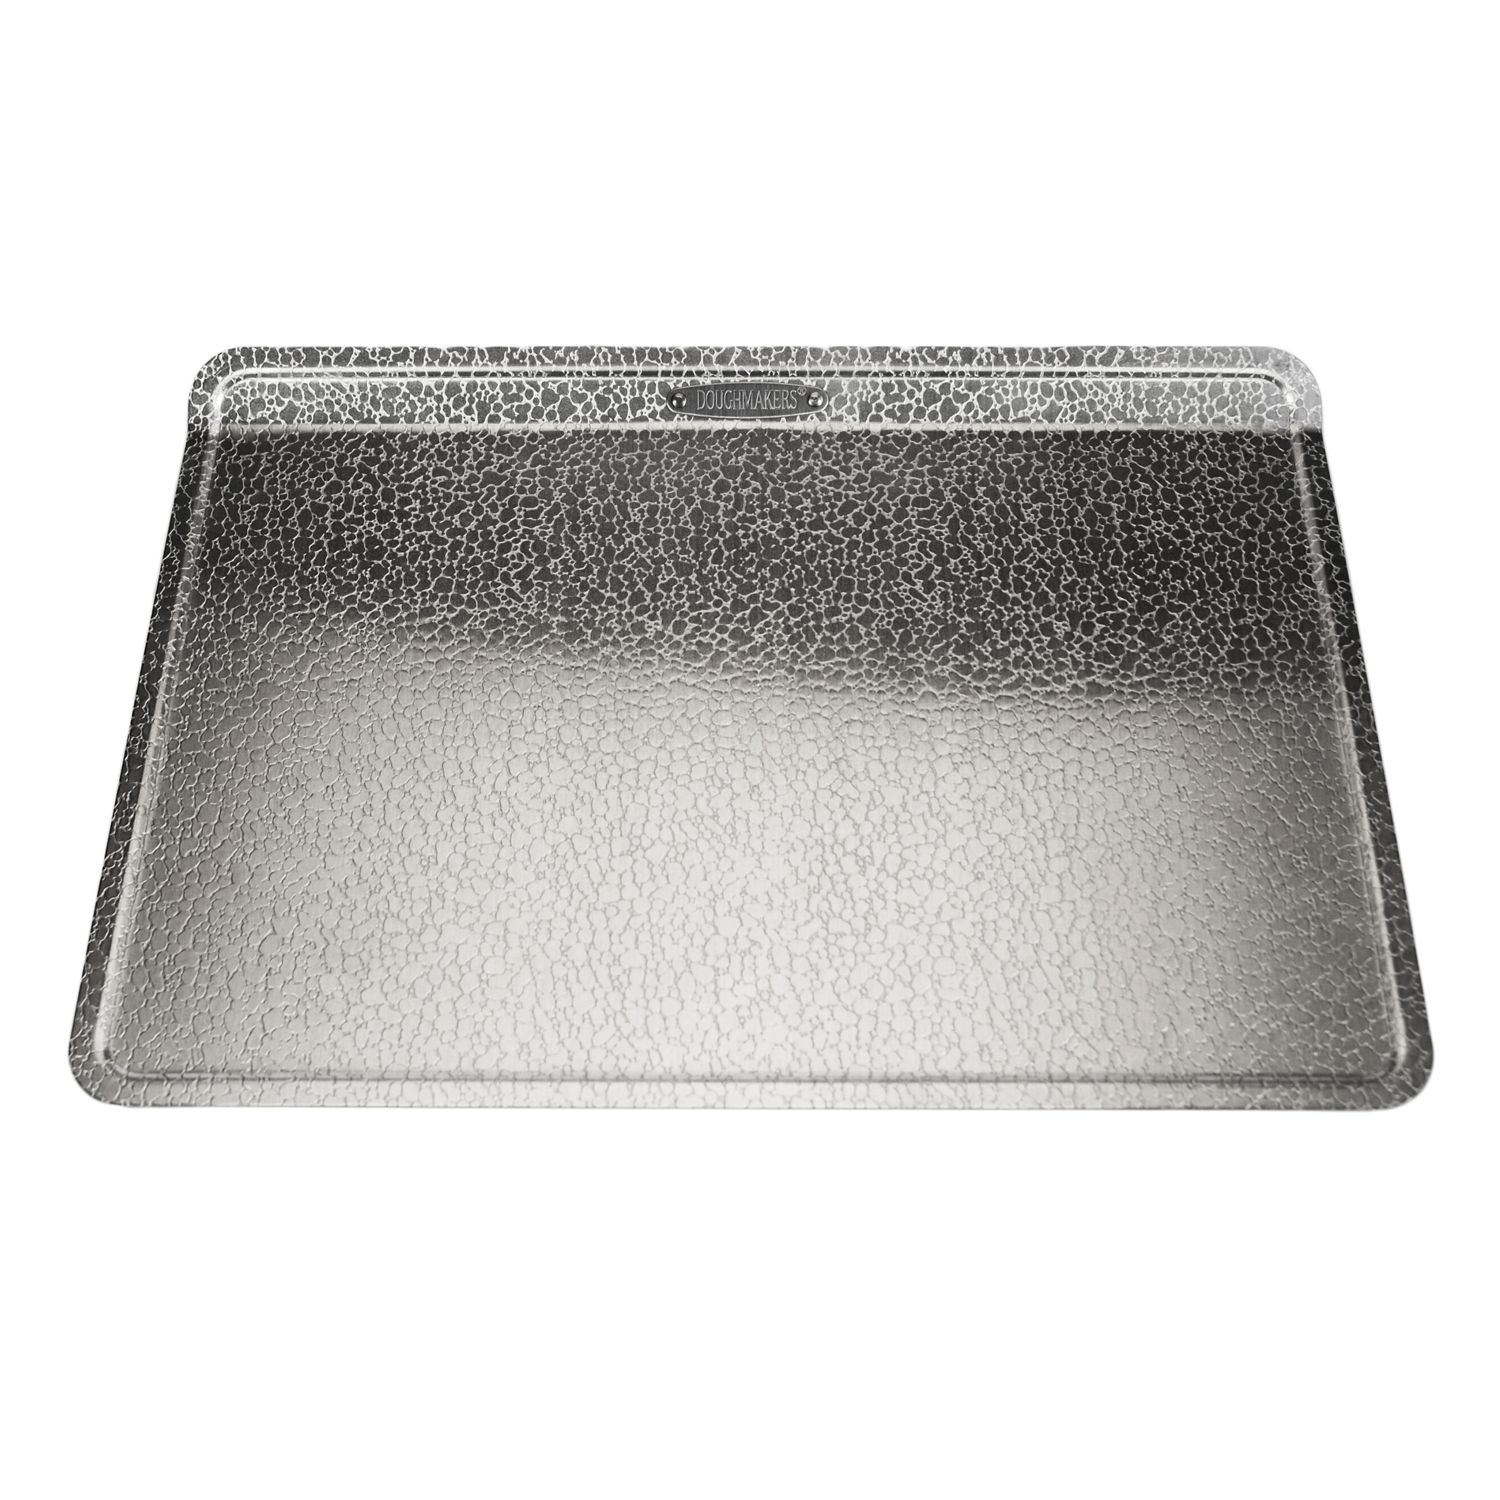 Image for Doughmakers Grand 14" x 17 1/2" Cookie Sheet at Kohl's.